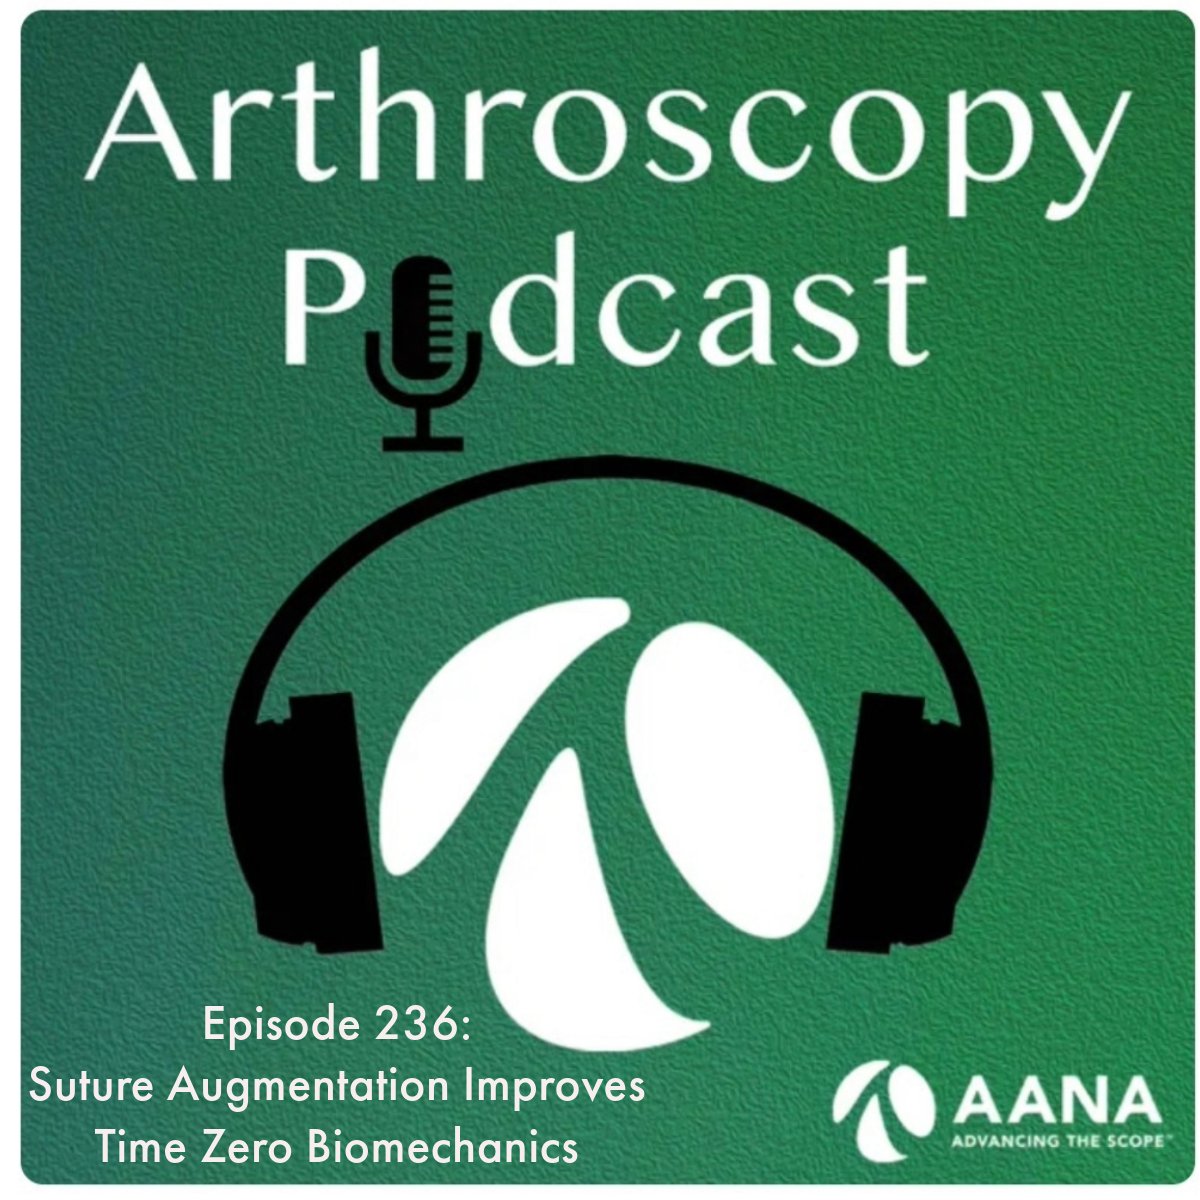 Drs. @christuckermd and @jachahla discuss suture augmentation in orthopedic surgery and the promising short-term clinical outcomes. Tune in anywhere you listen to podcasts including Apple, Spotify, or Google Podcasts #orthopedicsurgery